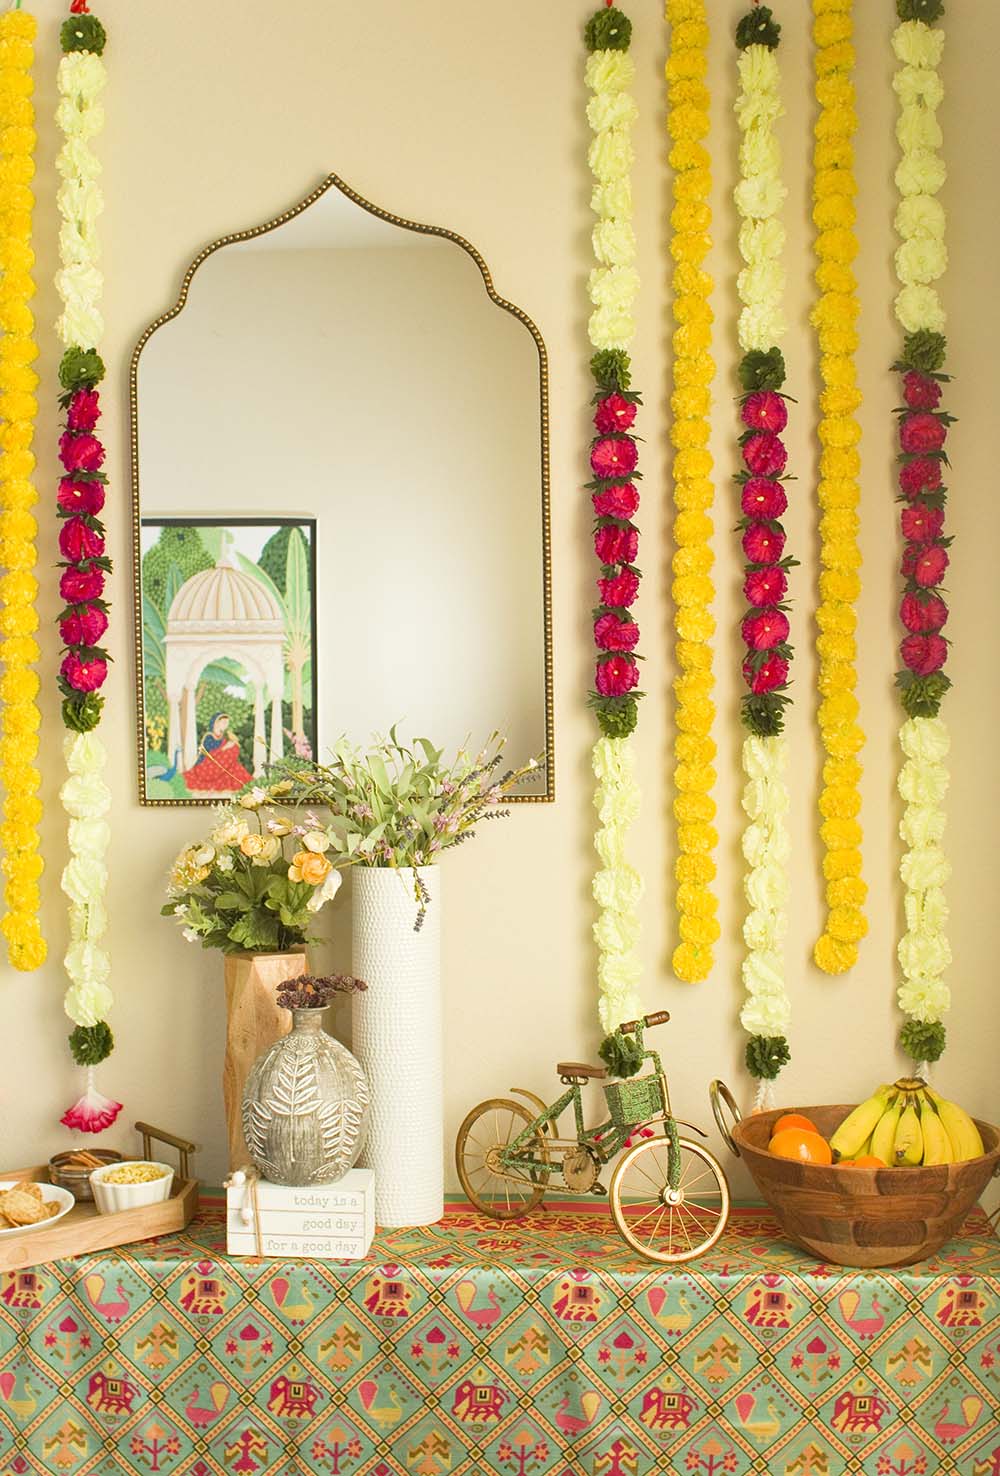 A mirror and wall flowers with a table.